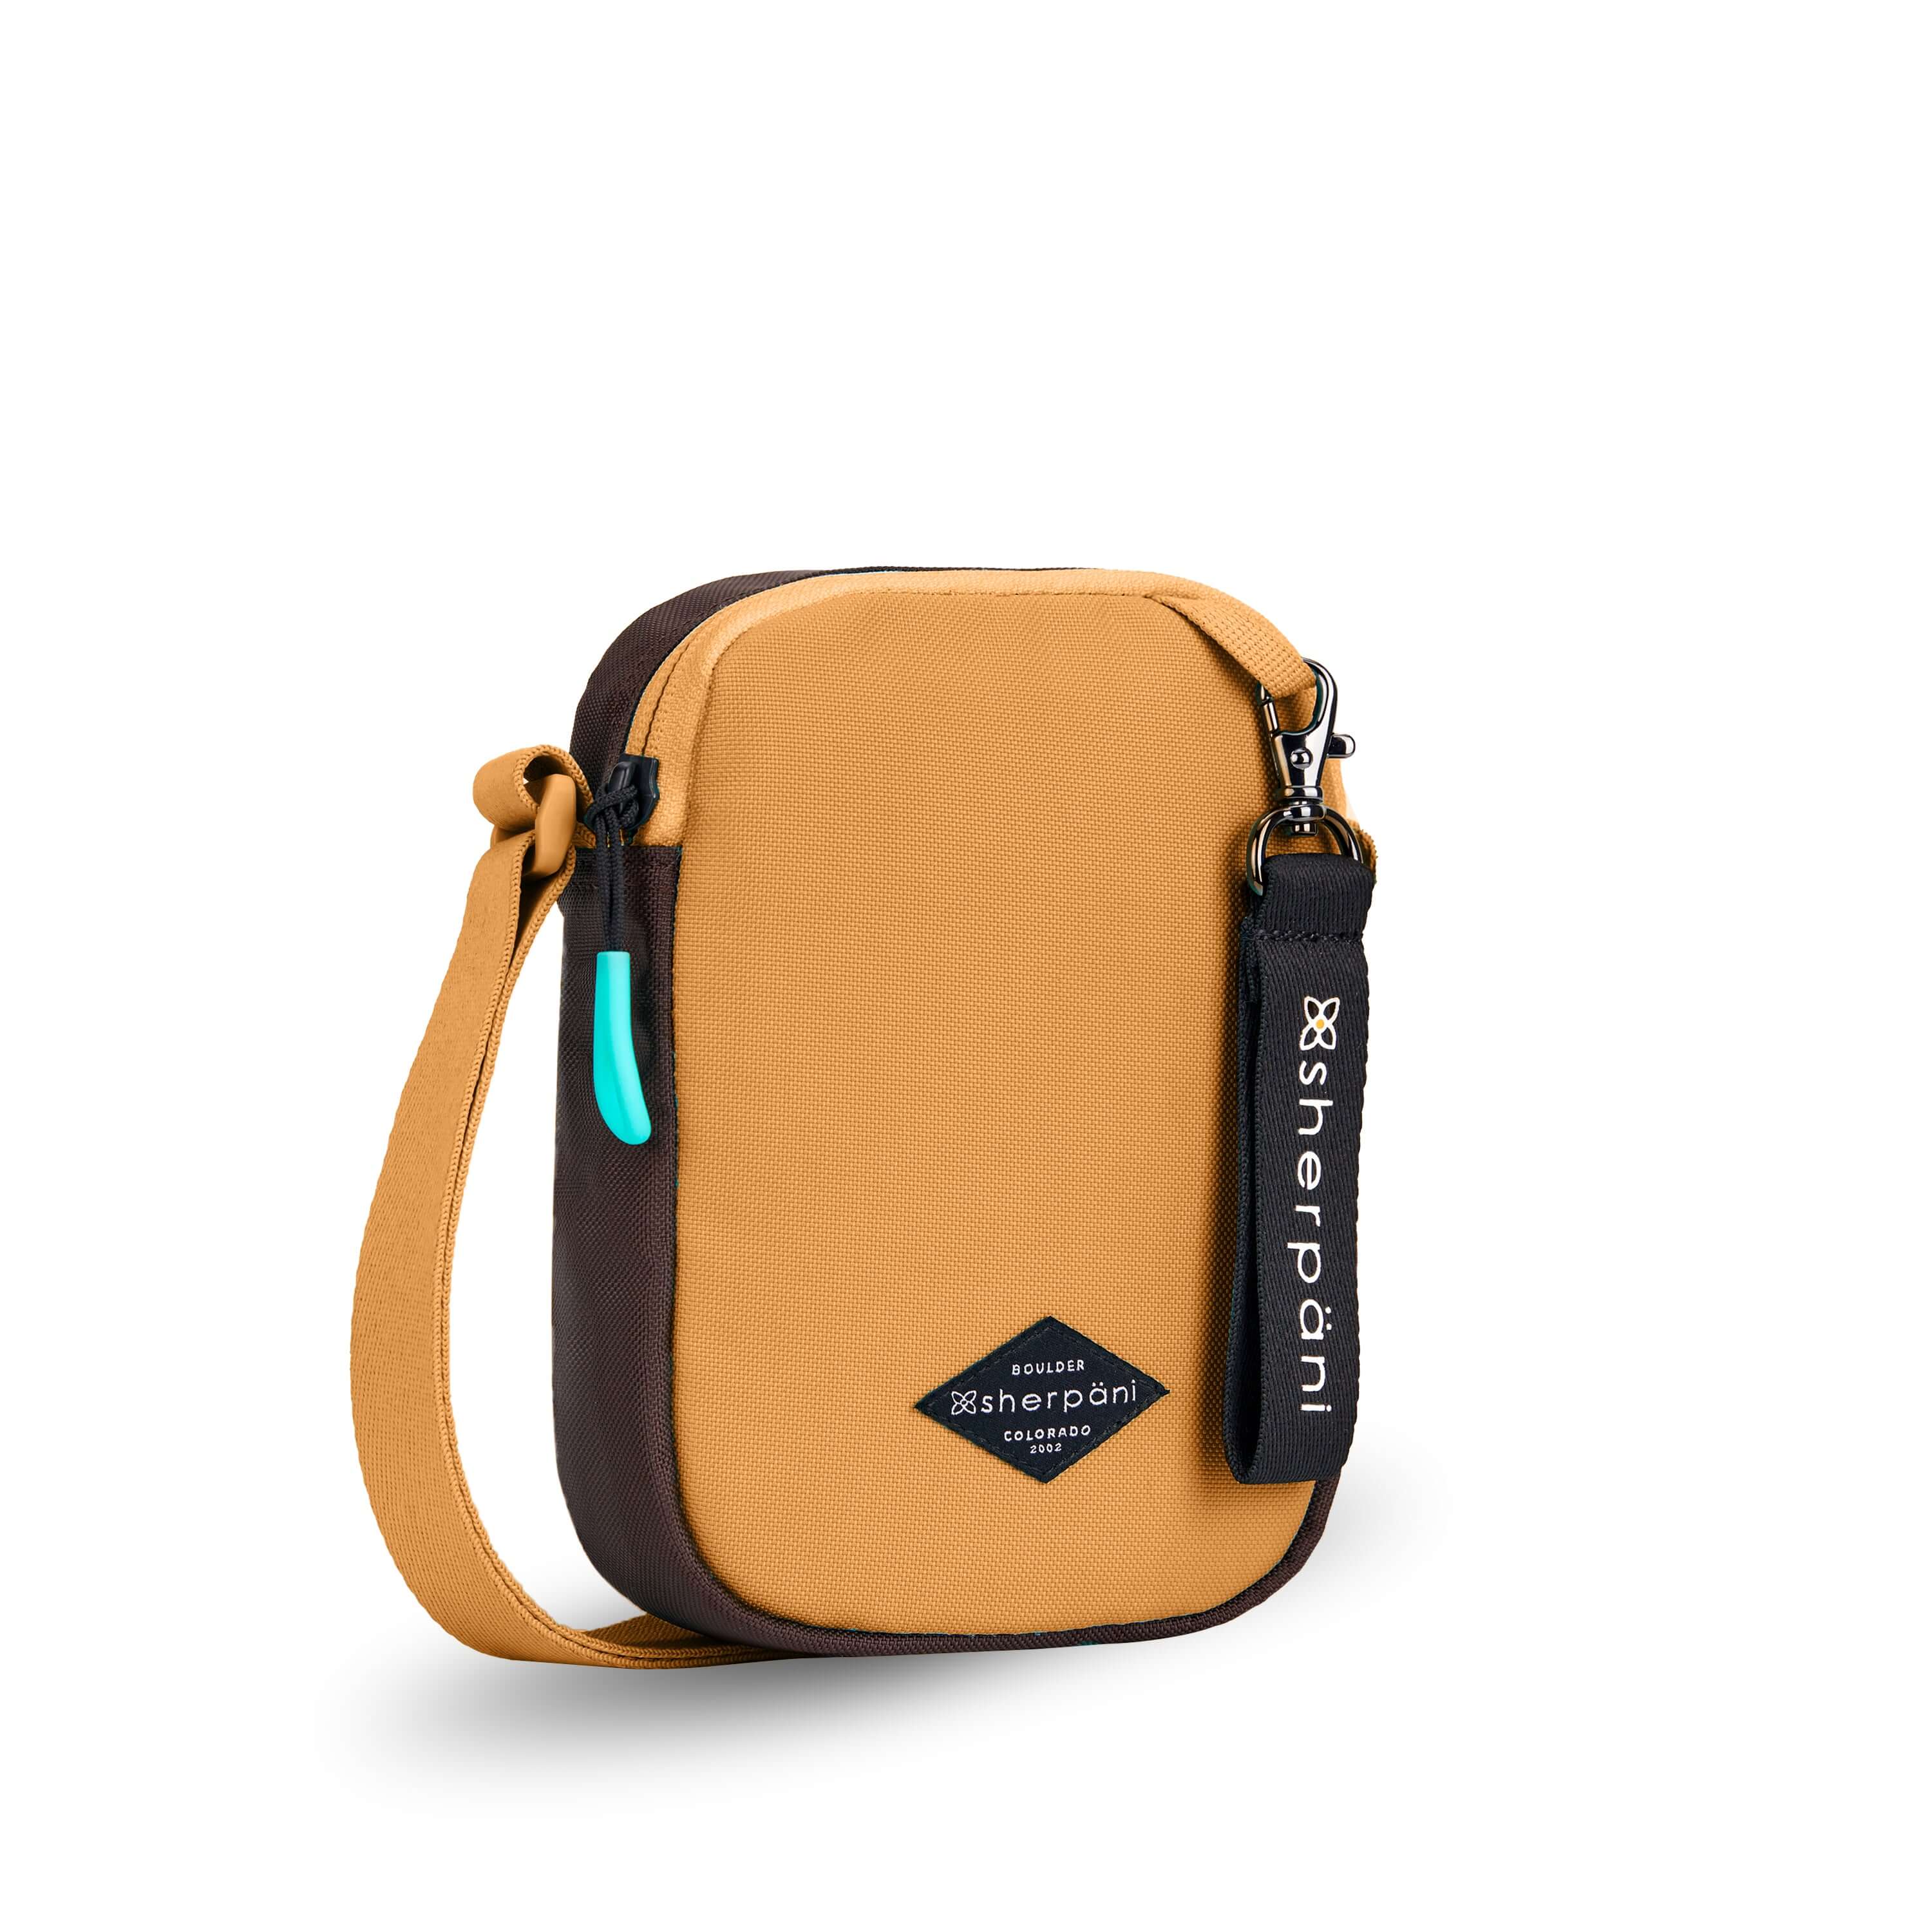 Angled front view of Sherpani crossbody, the Rogue in Sundial. The bag is two toned: the front is burnt yellow and the back is brown. The main zipper compartment features an easy-pull zipper accented in aqua. The bag has an adjustable crossbody strap. A branded Sherpani keychain is clipped to a fabric loop on the top right corner. #color_sundial